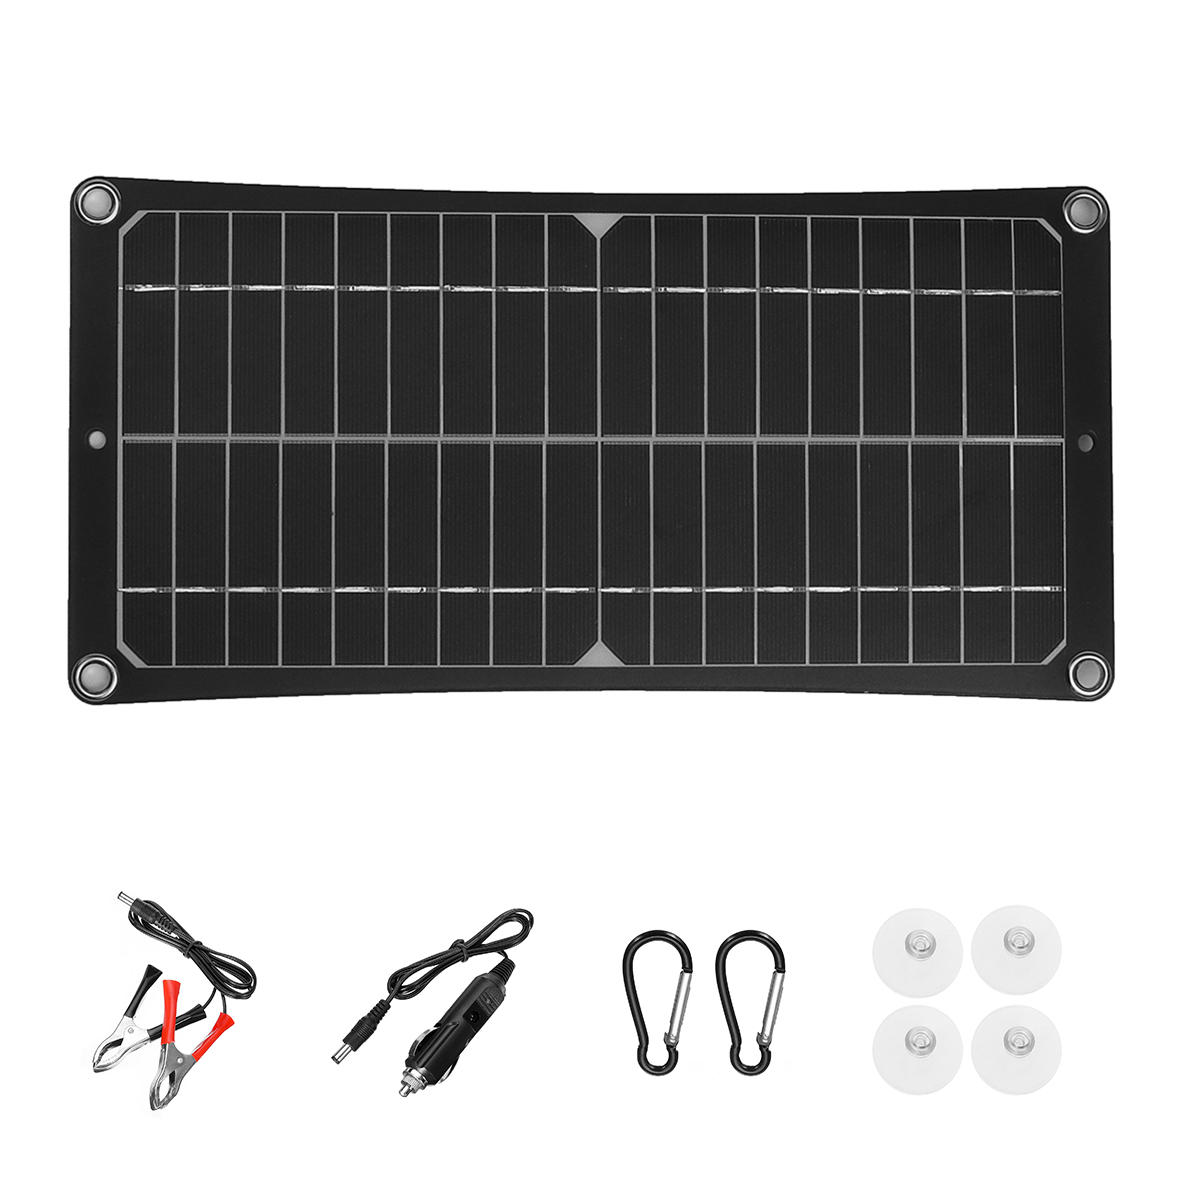 

10W 37x18cm Monocrystalline Silicon Semi-flexible Solar Panel with USB 12V/5V DC For Car Boat Charger